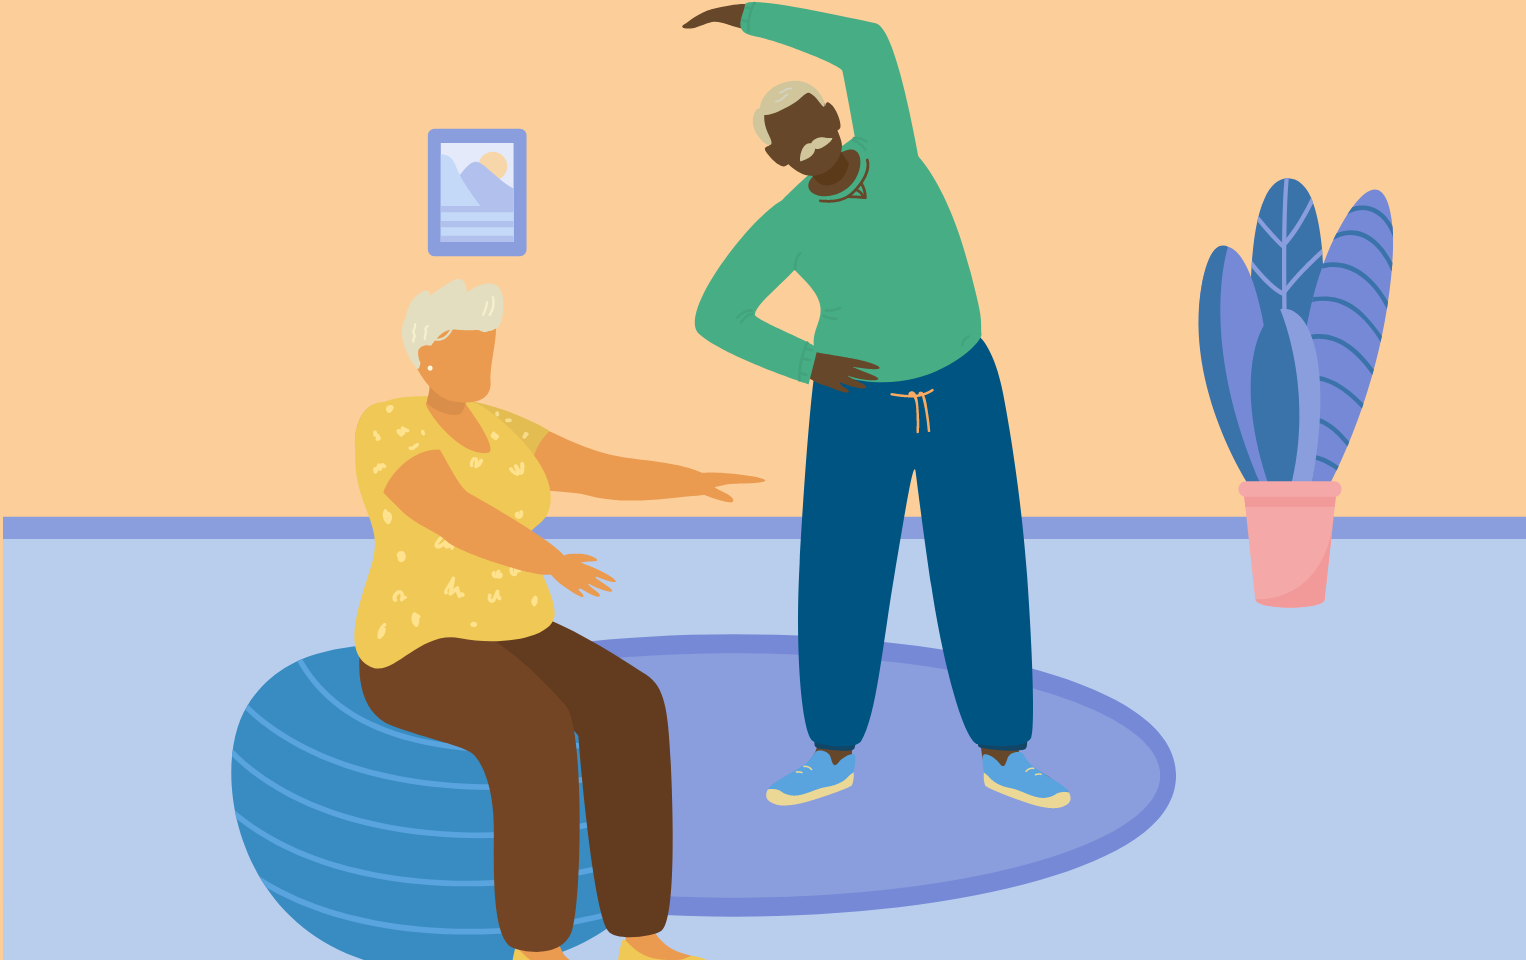 Illustration of two people stretching in a living room.